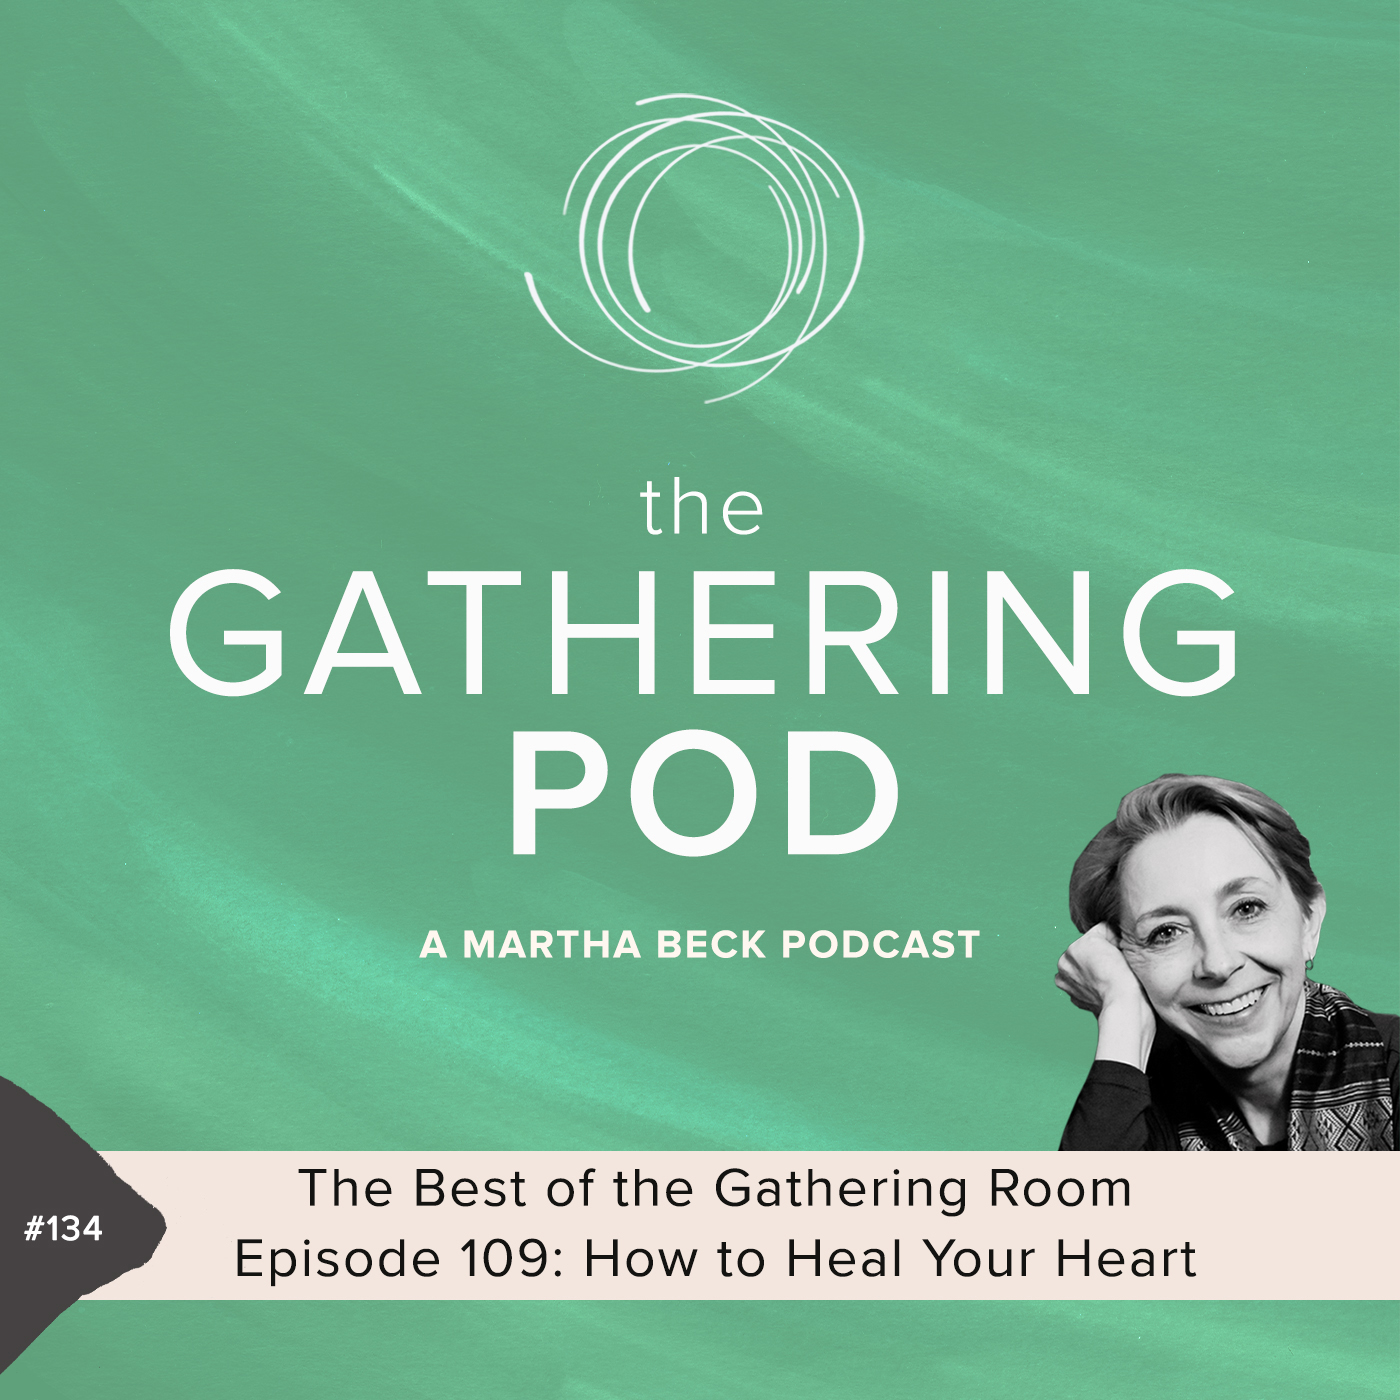 Image for The Gathering Pod A Martha Beck Podcast Episode #134 The Best of the Gathering Room – Episode 109: How to Heal Your Heart